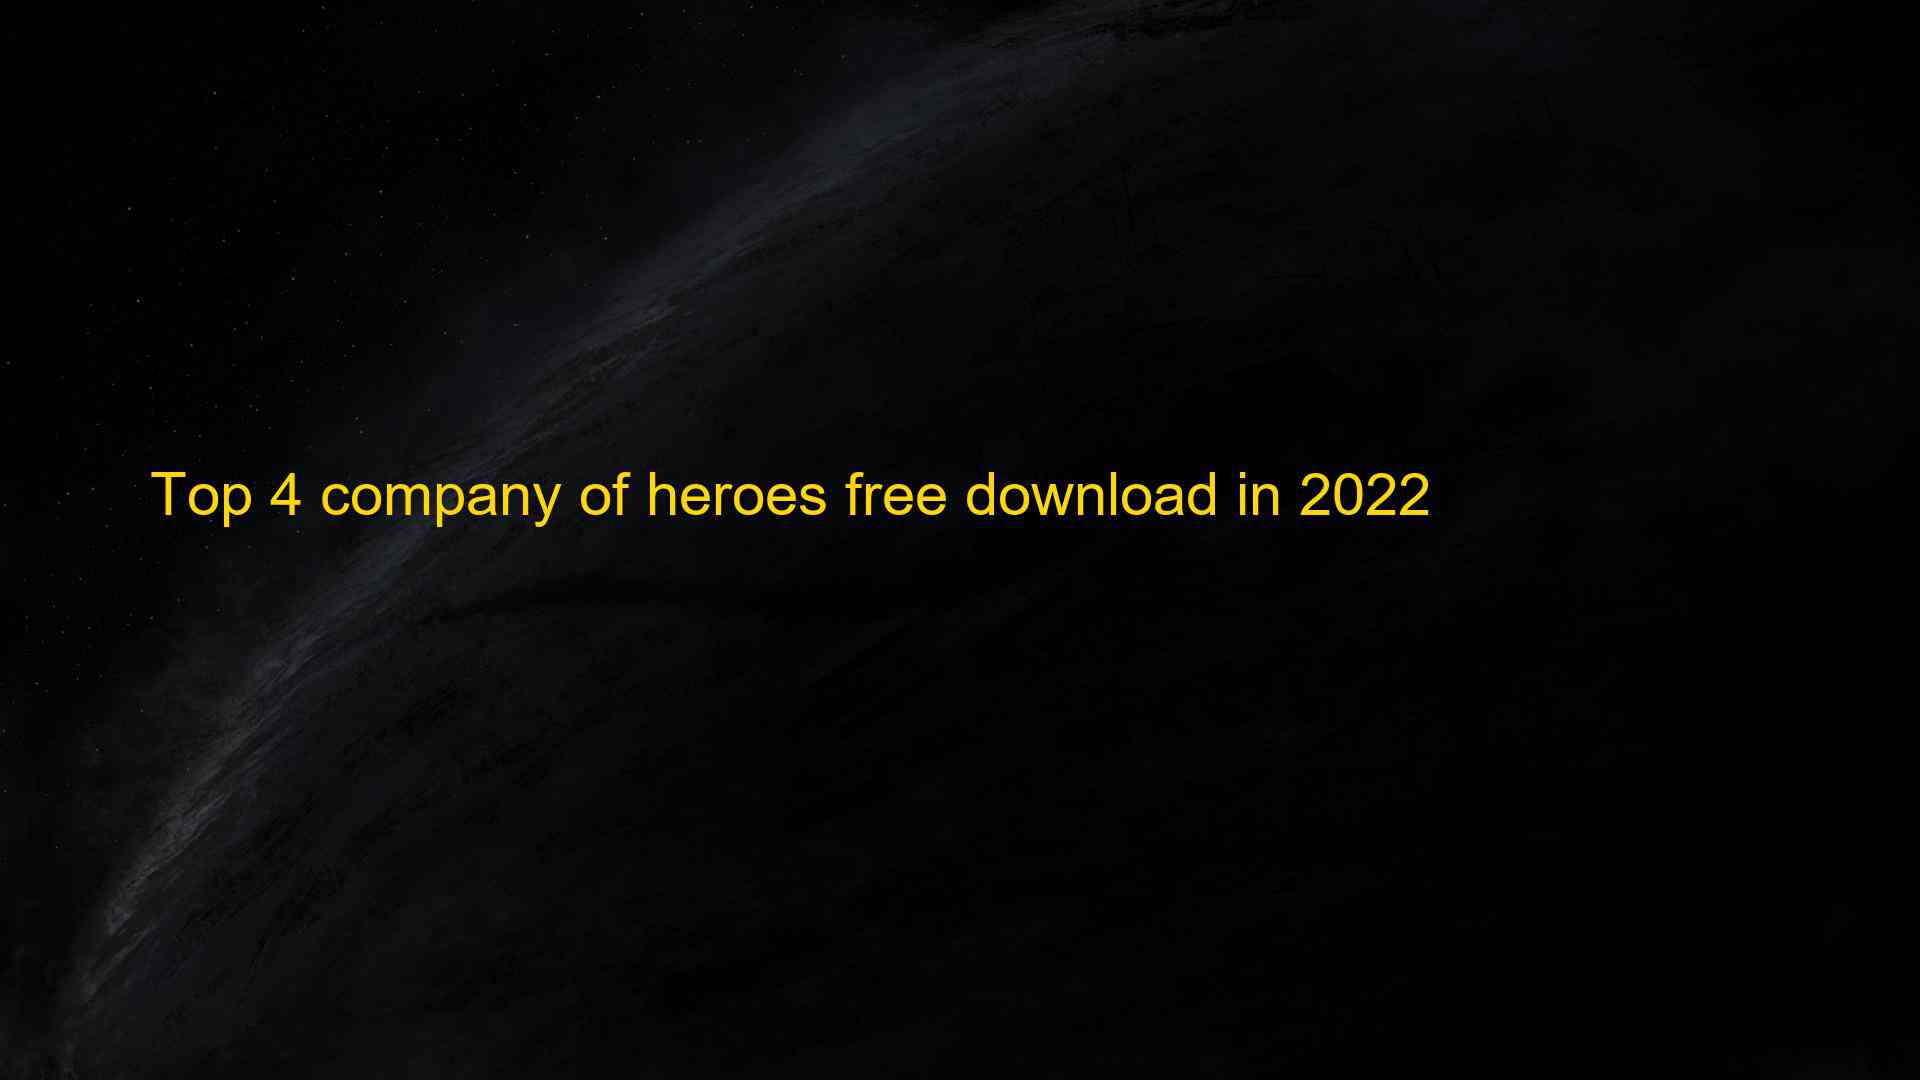 Top 4 company of heroes free download in 2022 1660118318